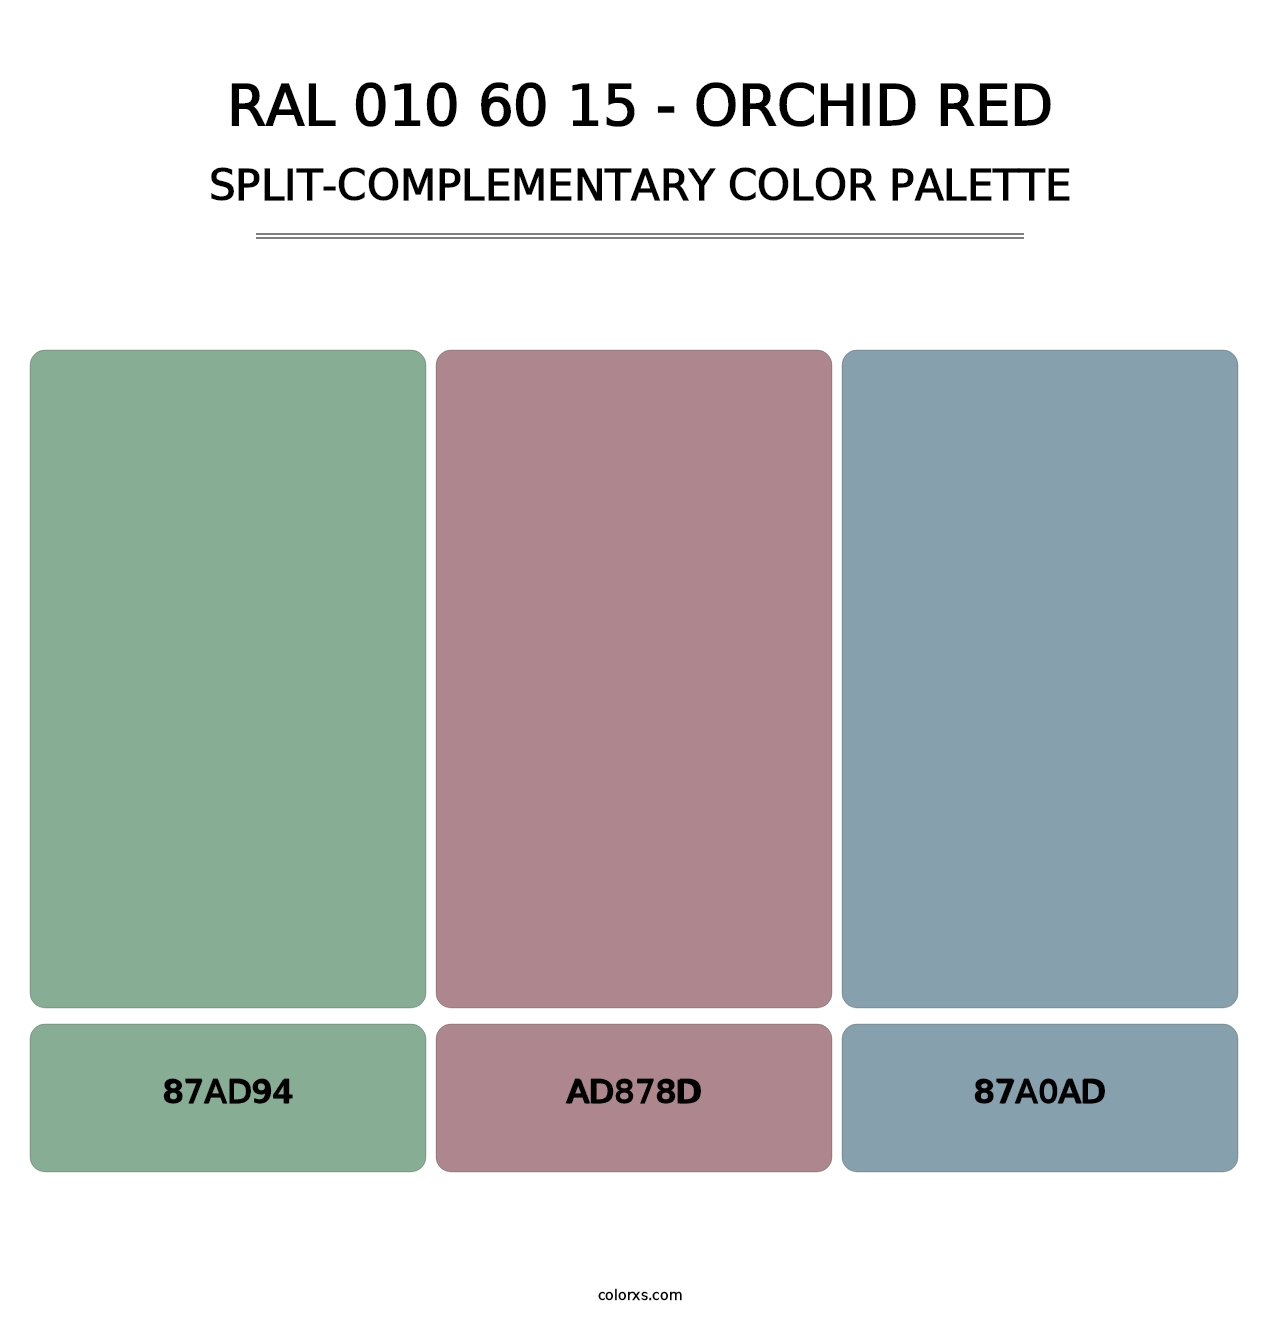 RAL 010 60 15 - Orchid Red - Split-Complementary Color Palette